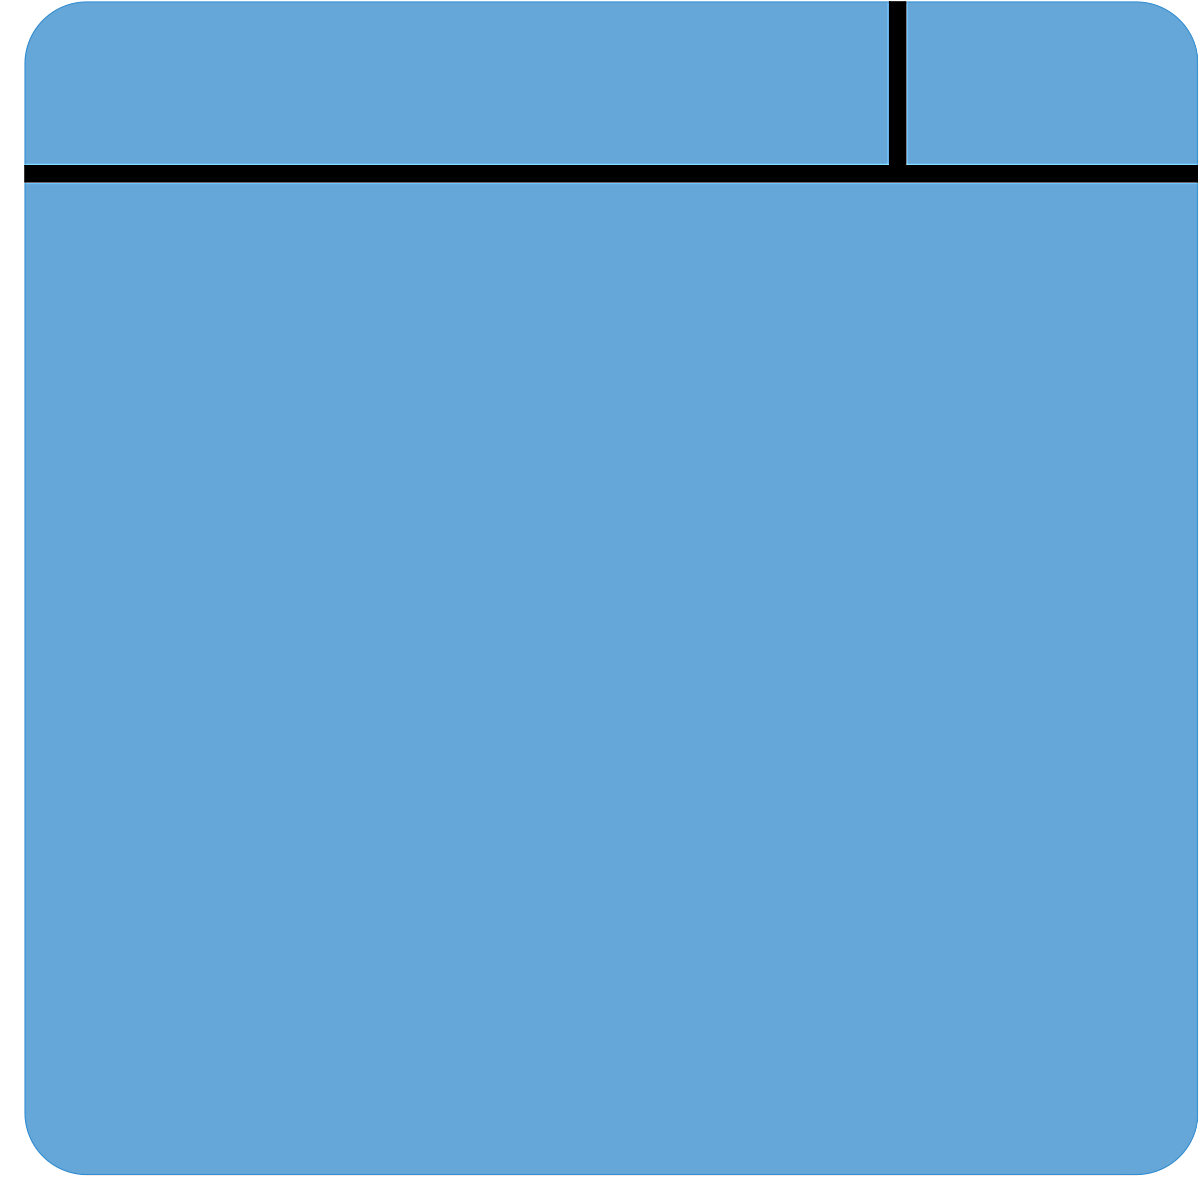 Post-it notes, magnetic, LxW 100 x 100 mm, pack of 10, light blue-11